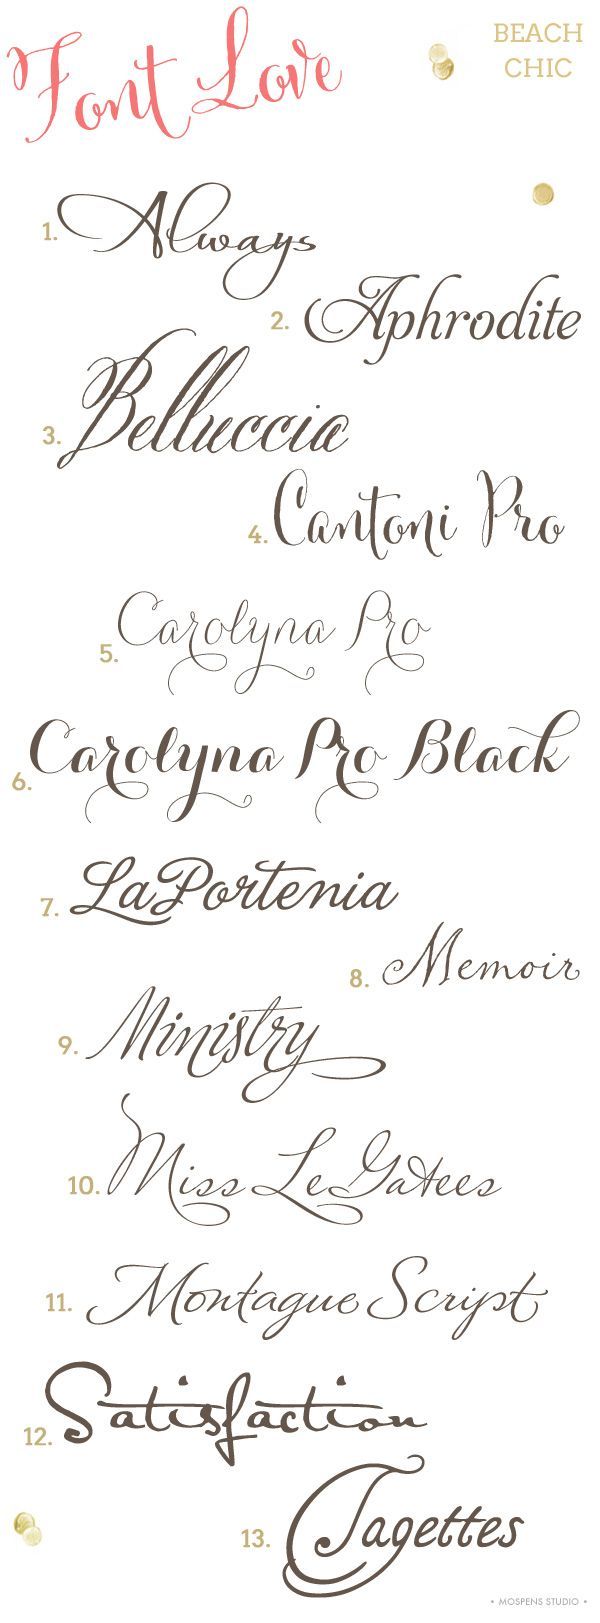 saved this in case you/we/me does the layout for save-the-dates and/or invitation – some very pretty fonts